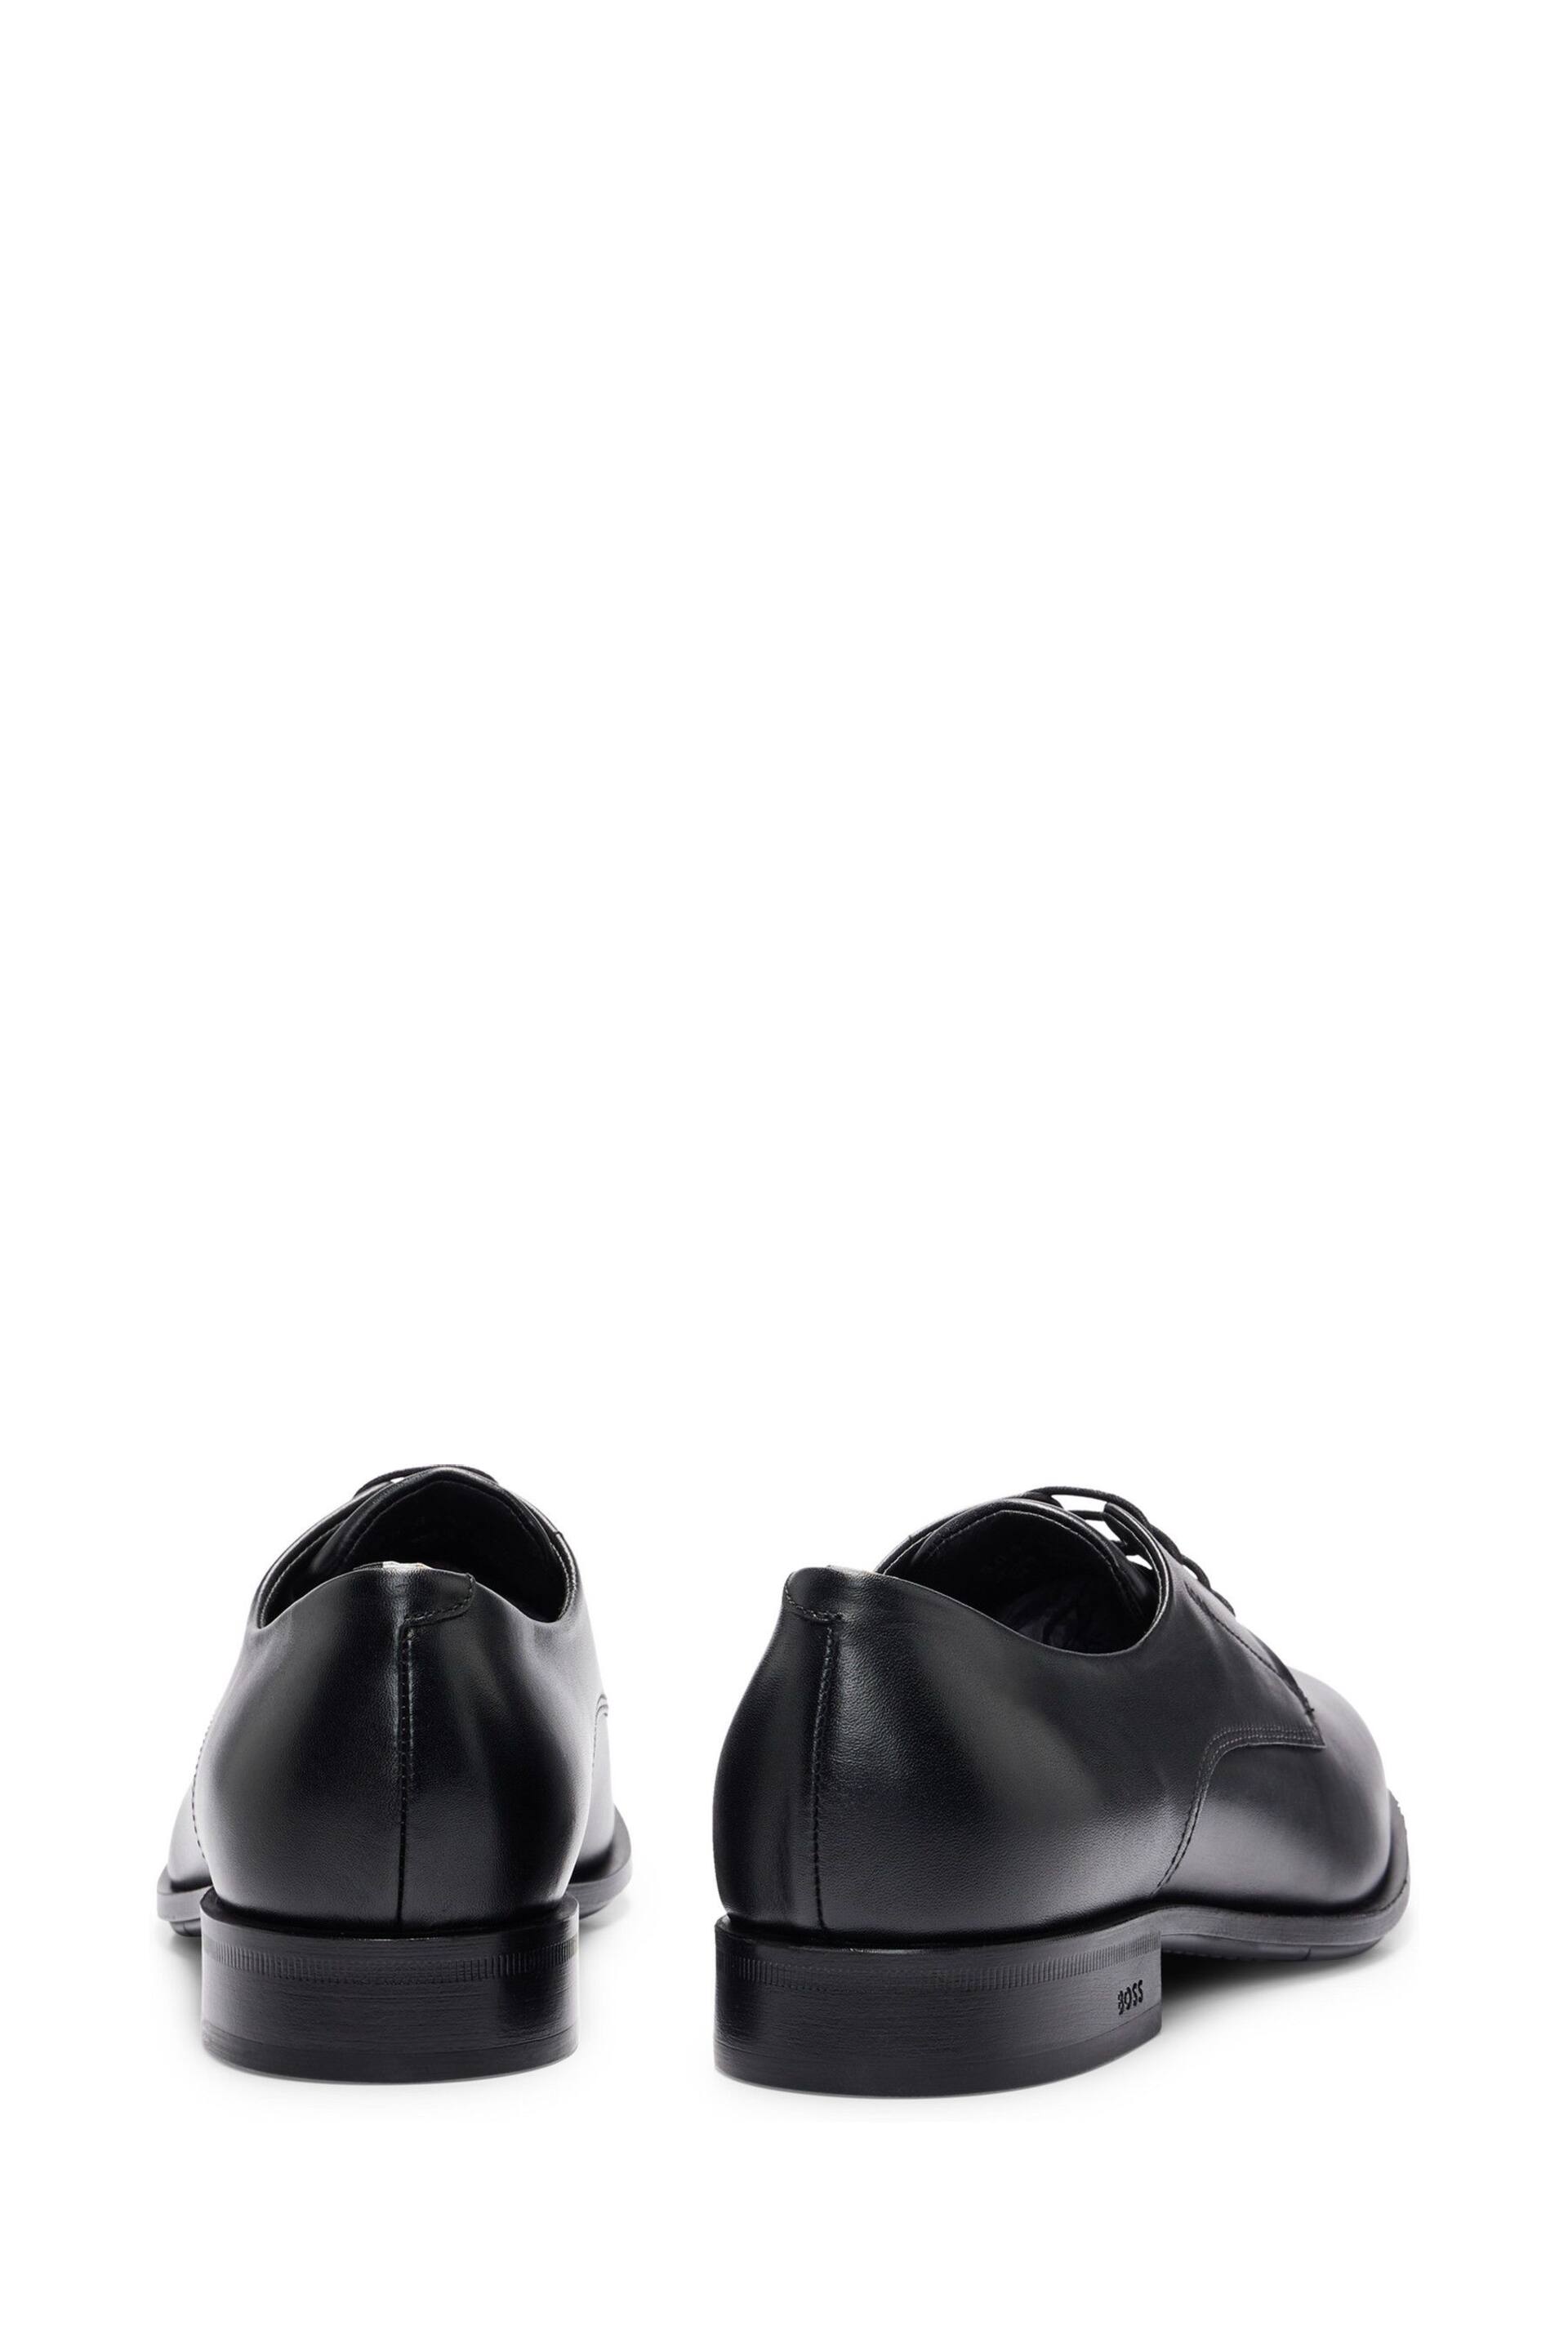 BOSS Black Colby Shoes - Image 3 of 4